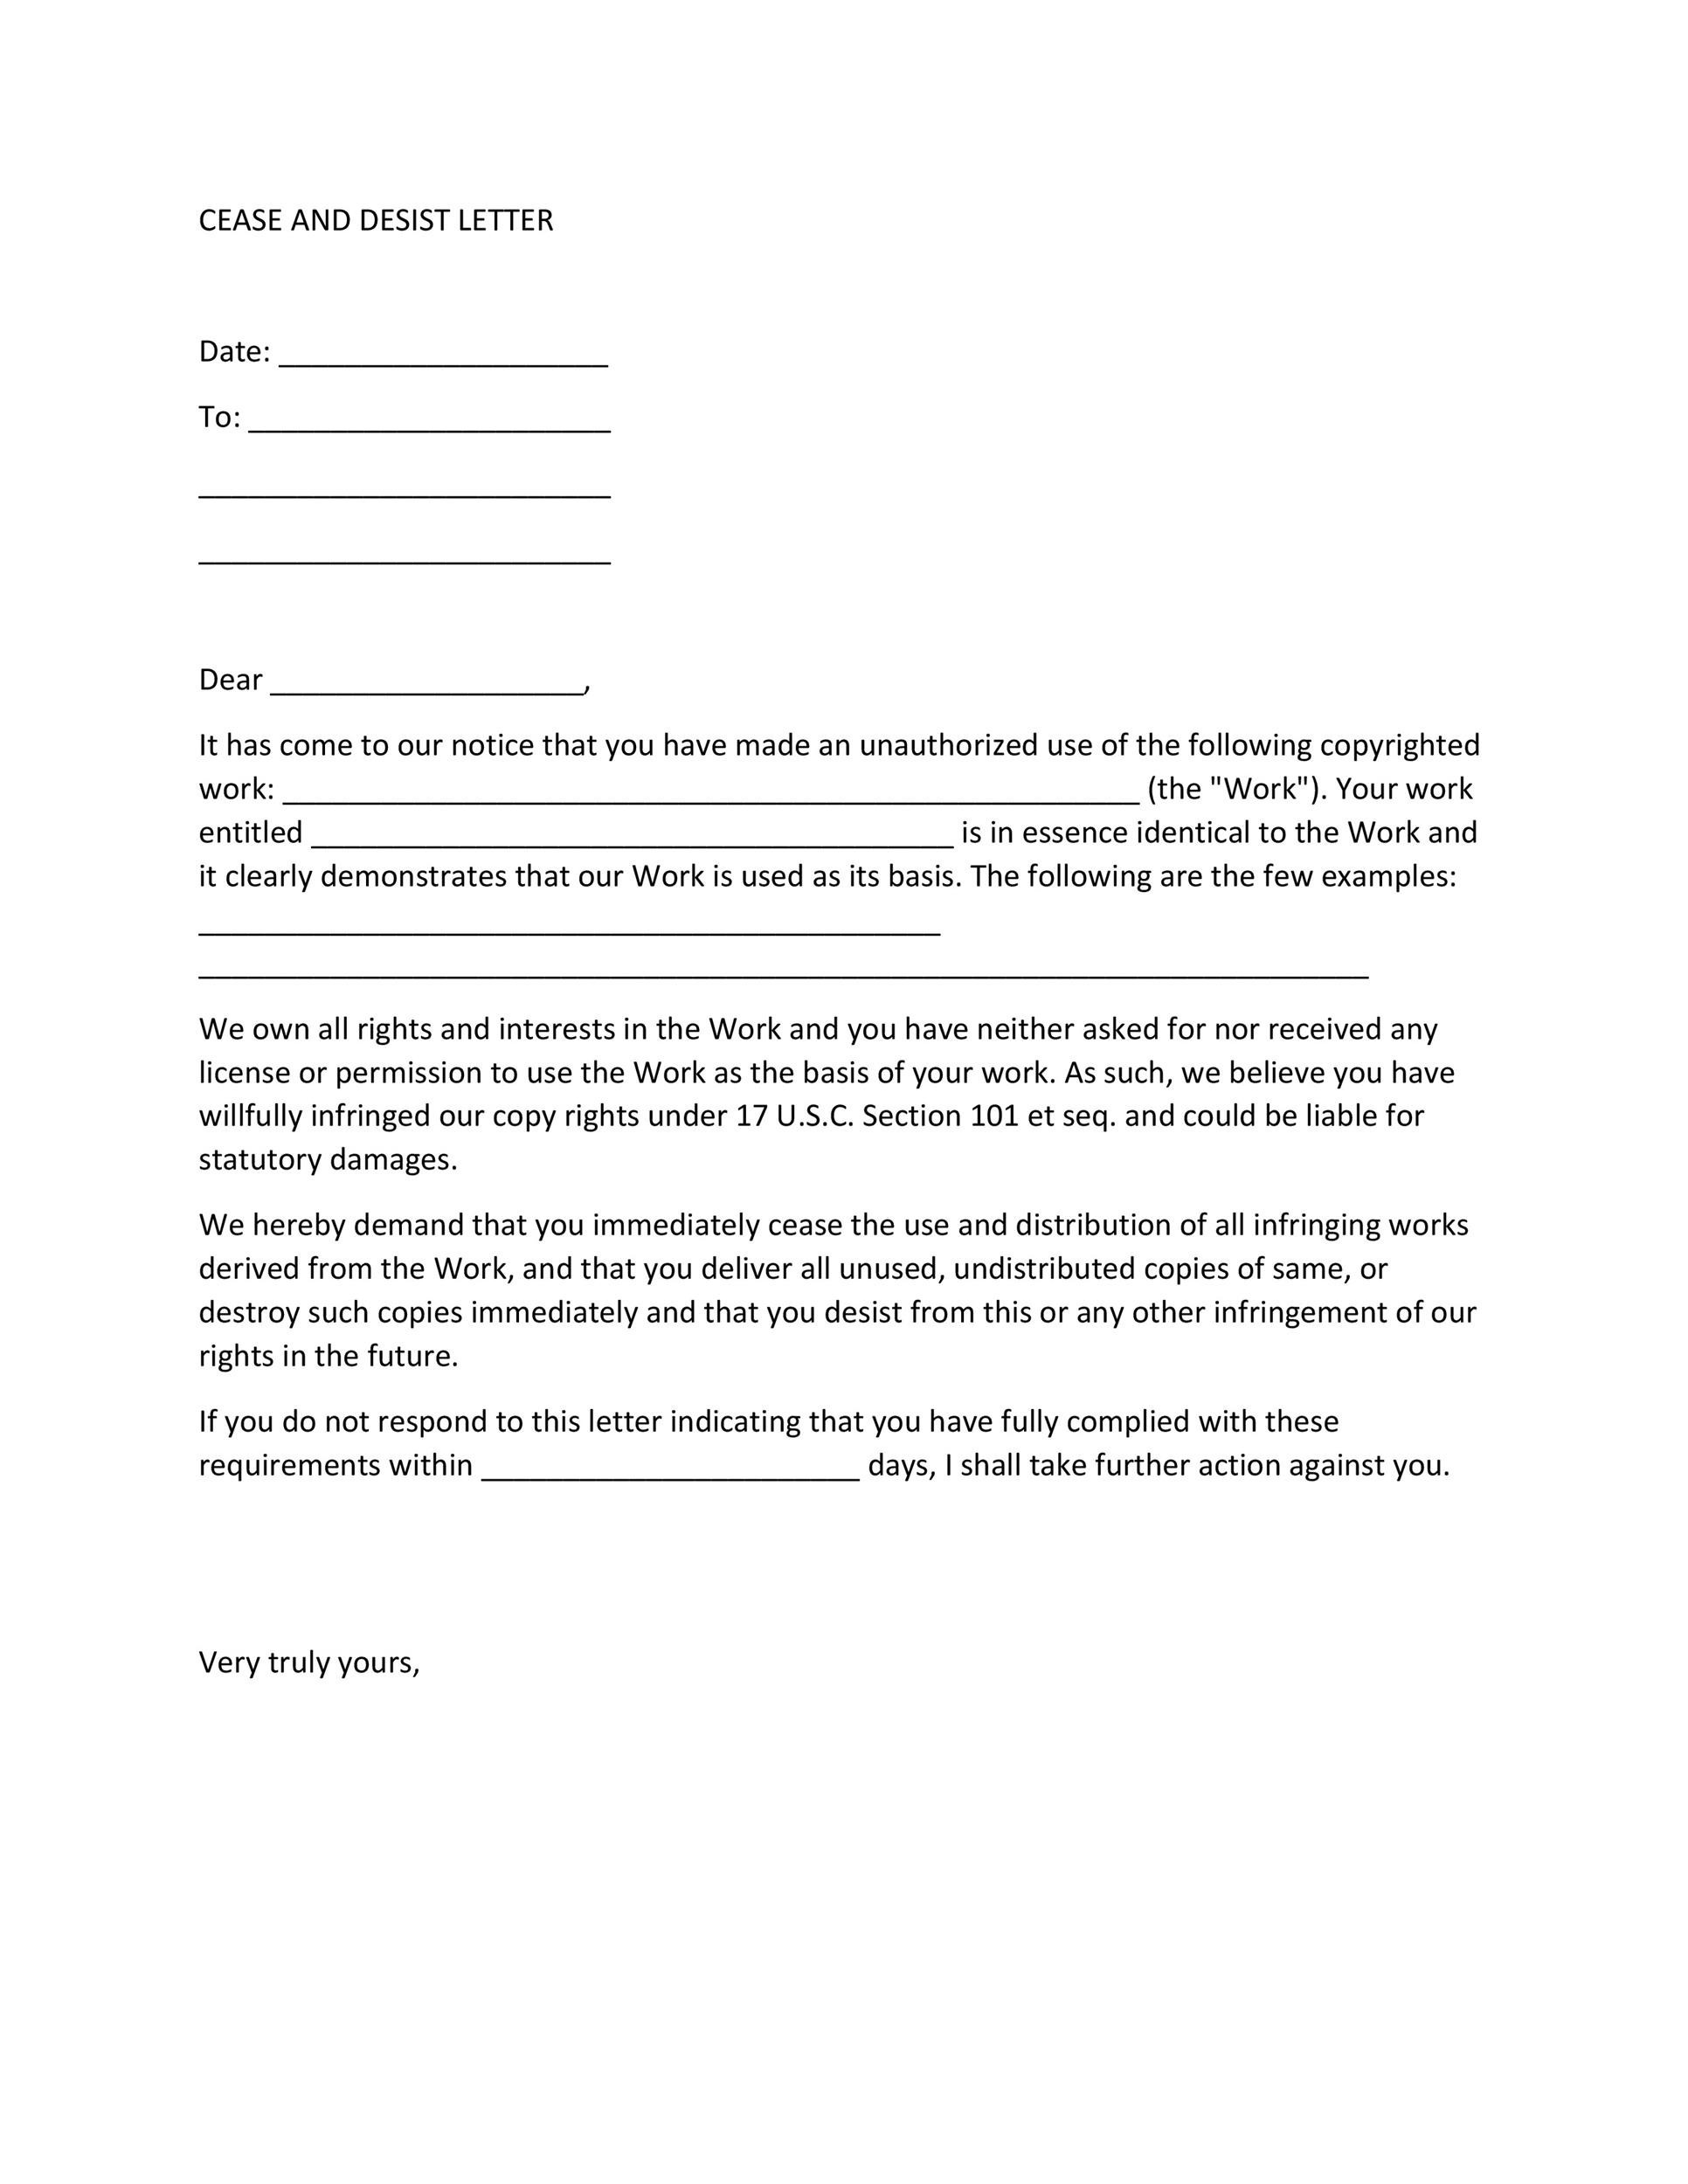 30+ Cease and Desist Letter Templates [FREE] ᐅ TemplateLab